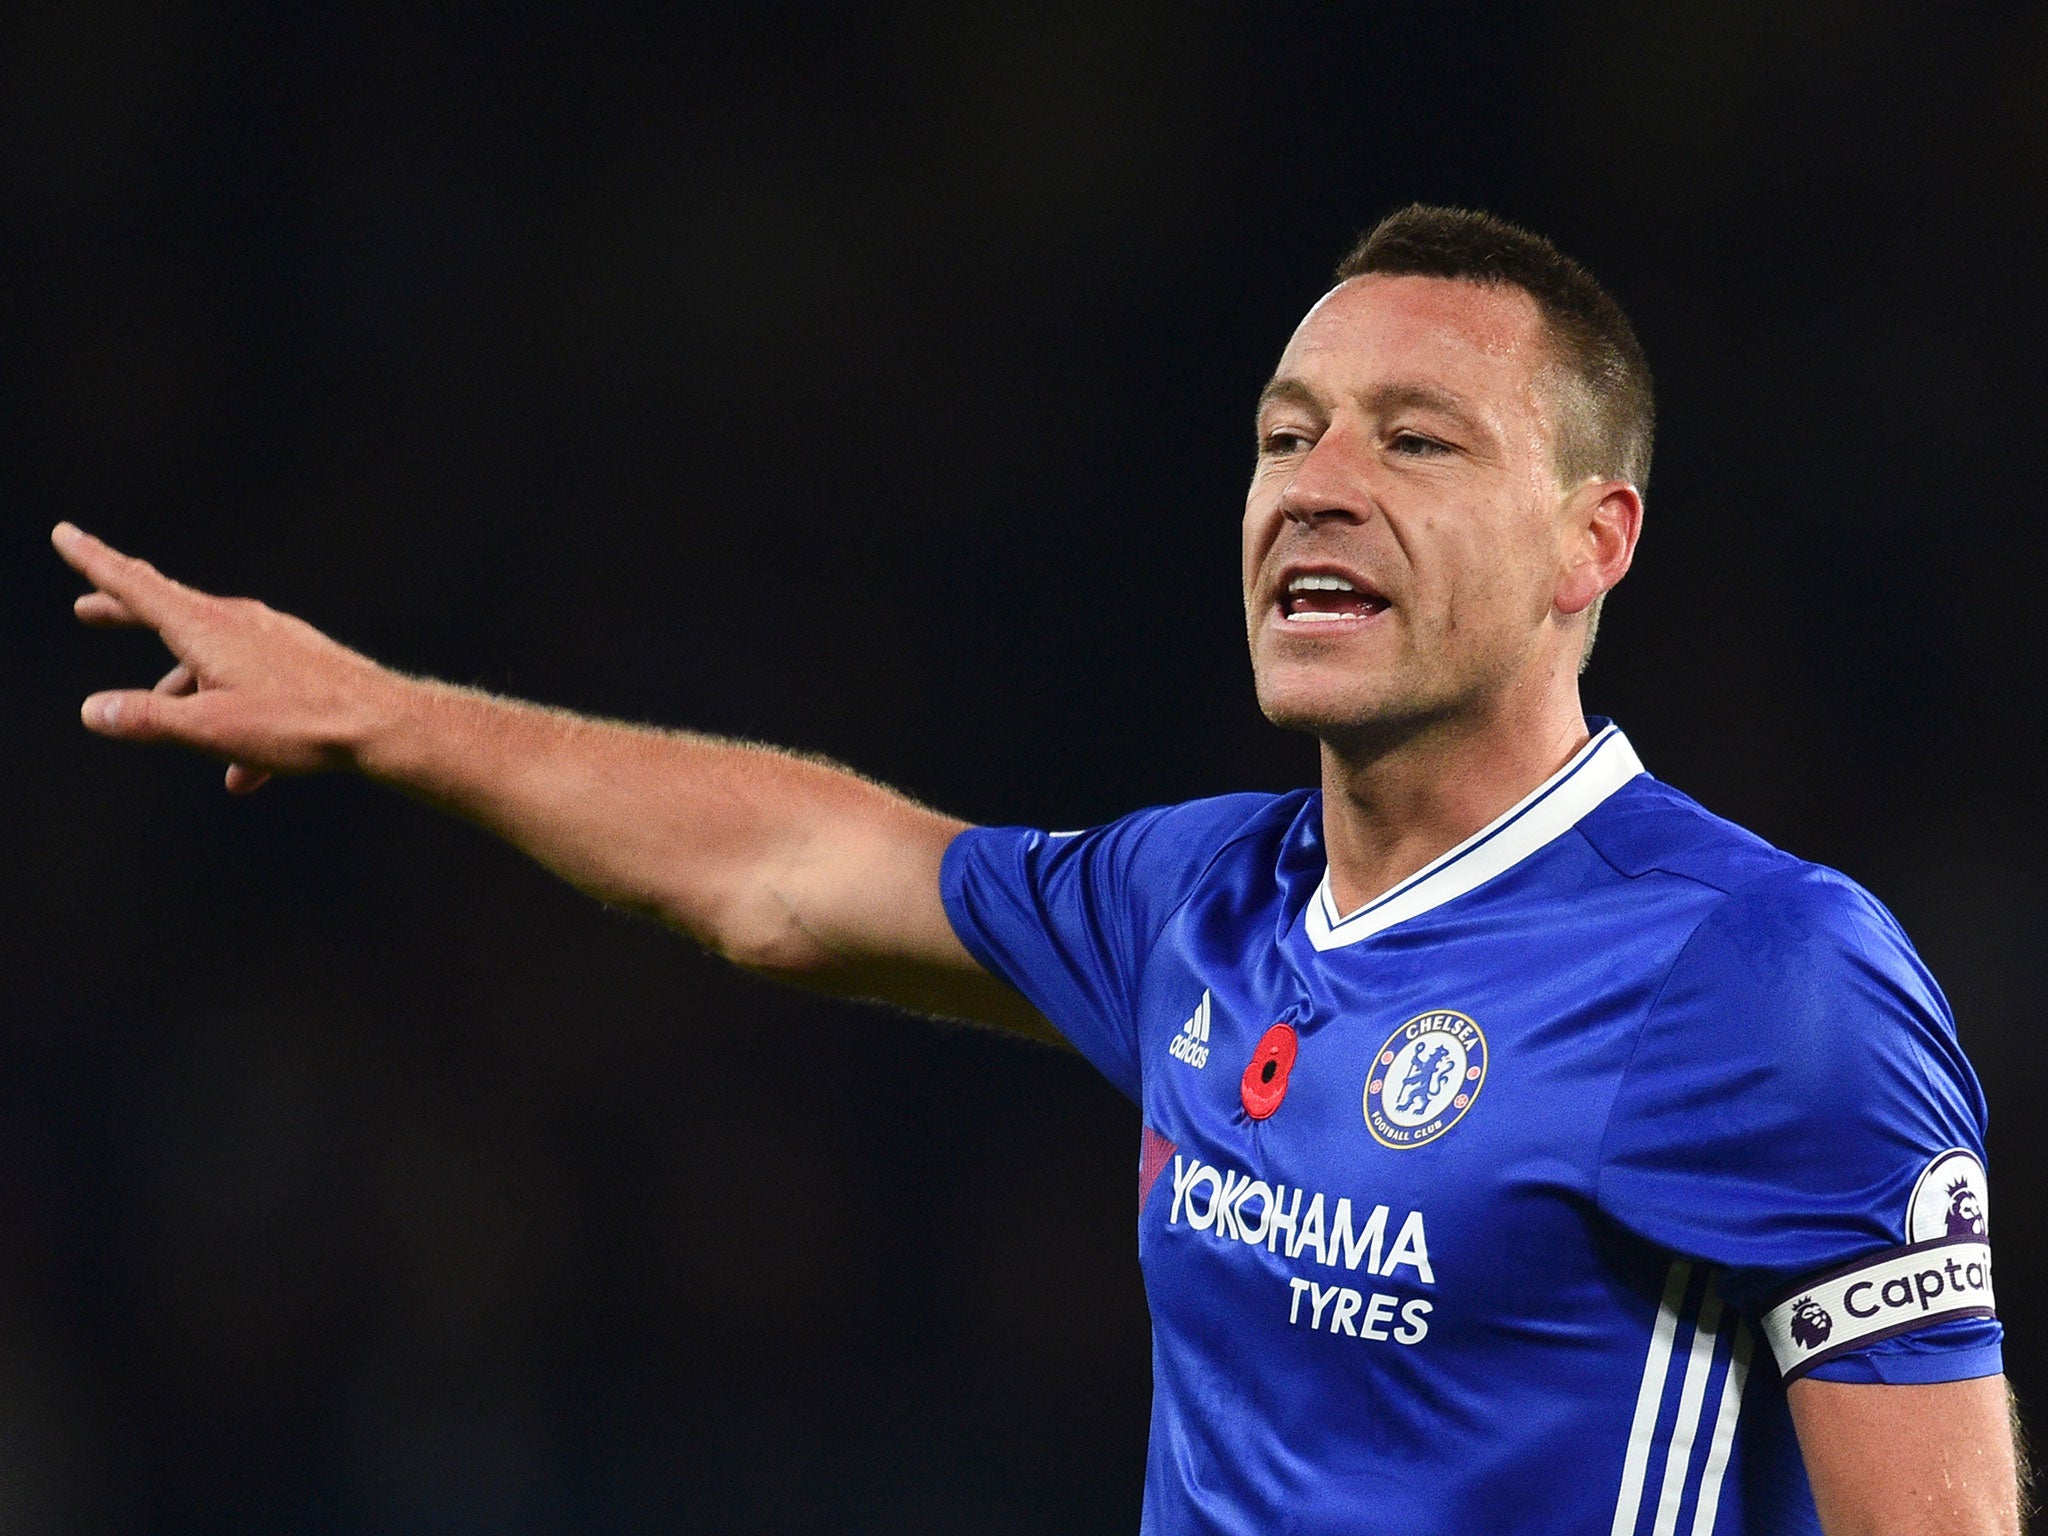 John Terry has struggled to cement a regular place in Antonio Conte's side this season